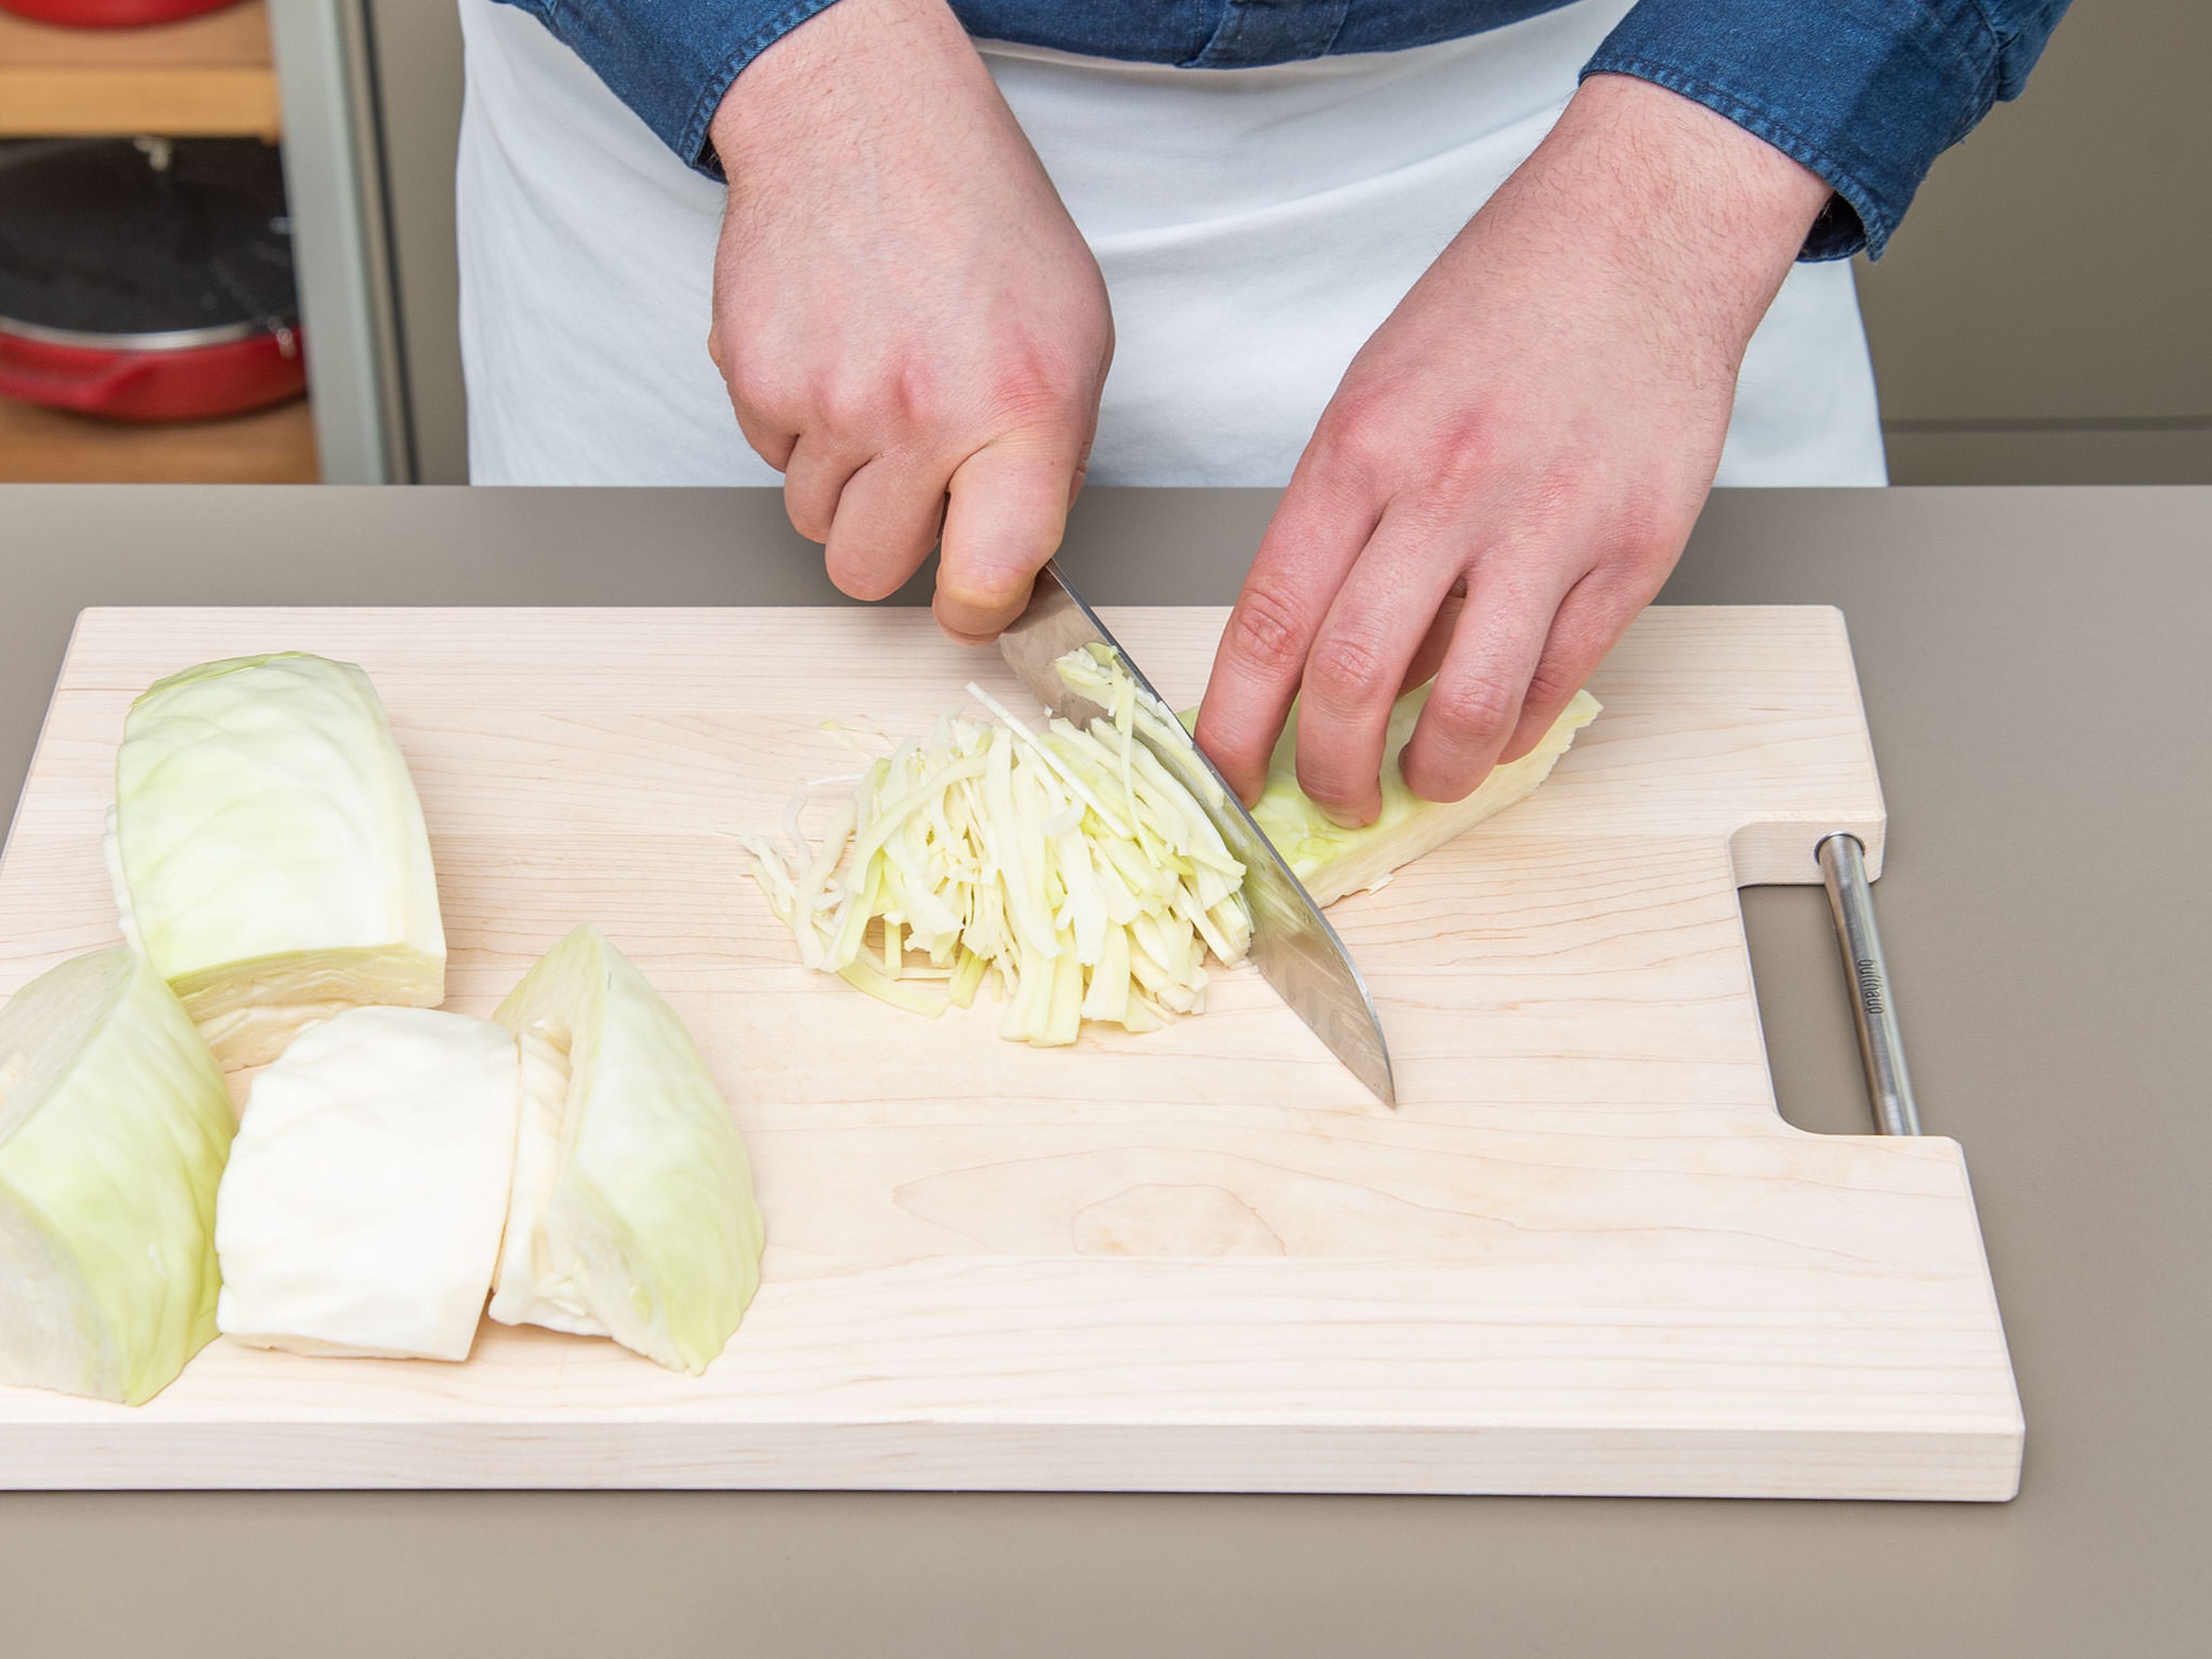 Clean and quarter white cabbage. Make a cut to remove the stem. Slice the white cabbage thin and add to a large bowl.